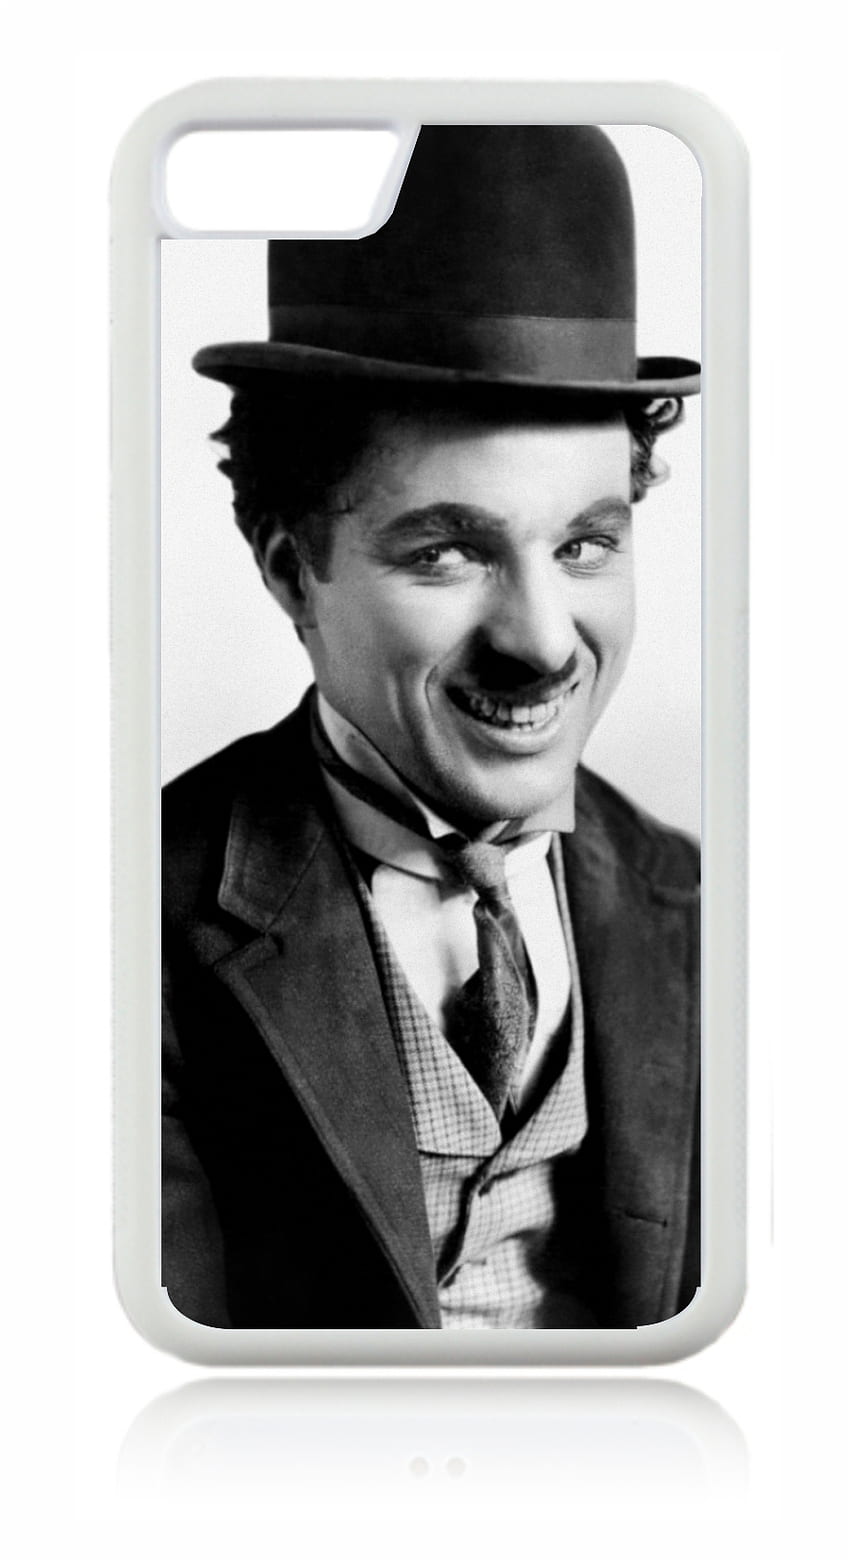 Charlie Chaplin Vintage Celebrity Actor White Rubber Case for the Apple iPhone 6 / iPhone 6s - iPhone 6 Accessories - iPhone 6s Accessories, Charlie Chaplin iPhone 6s HD phone wallpaper